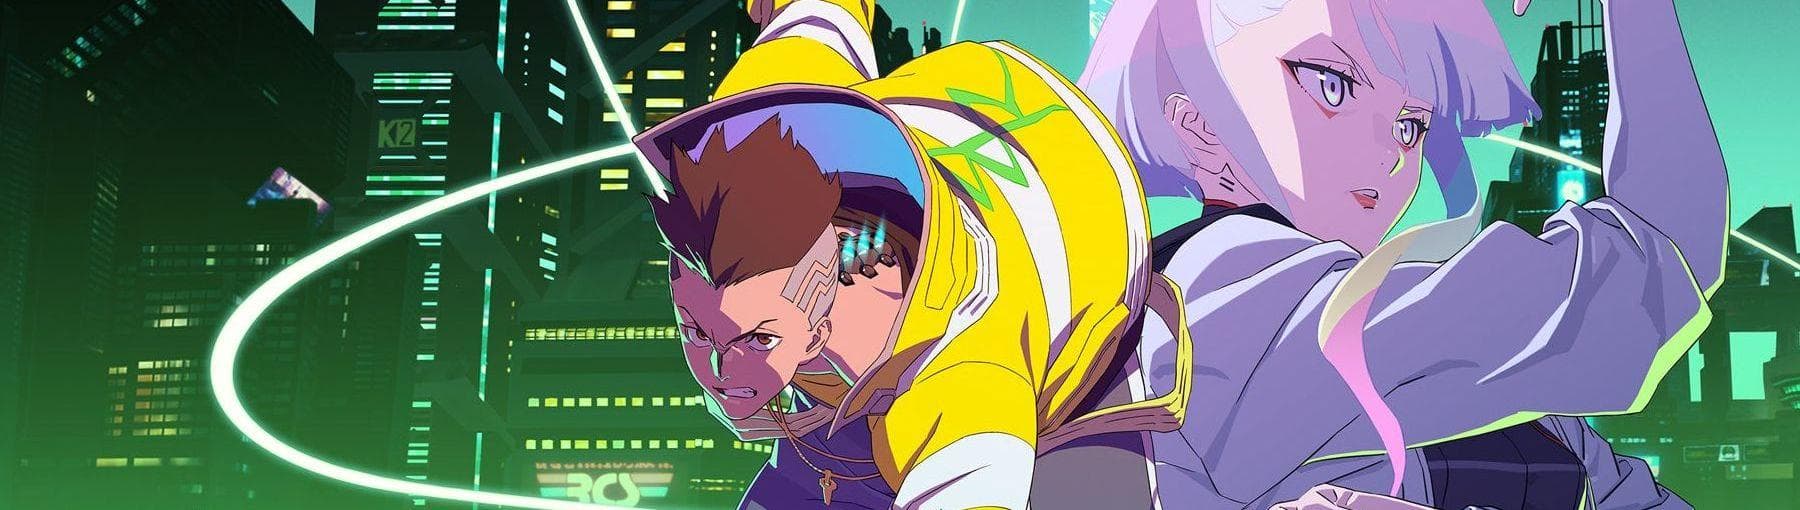 Top 5 Cyberpunk anime of all time (Ranked)